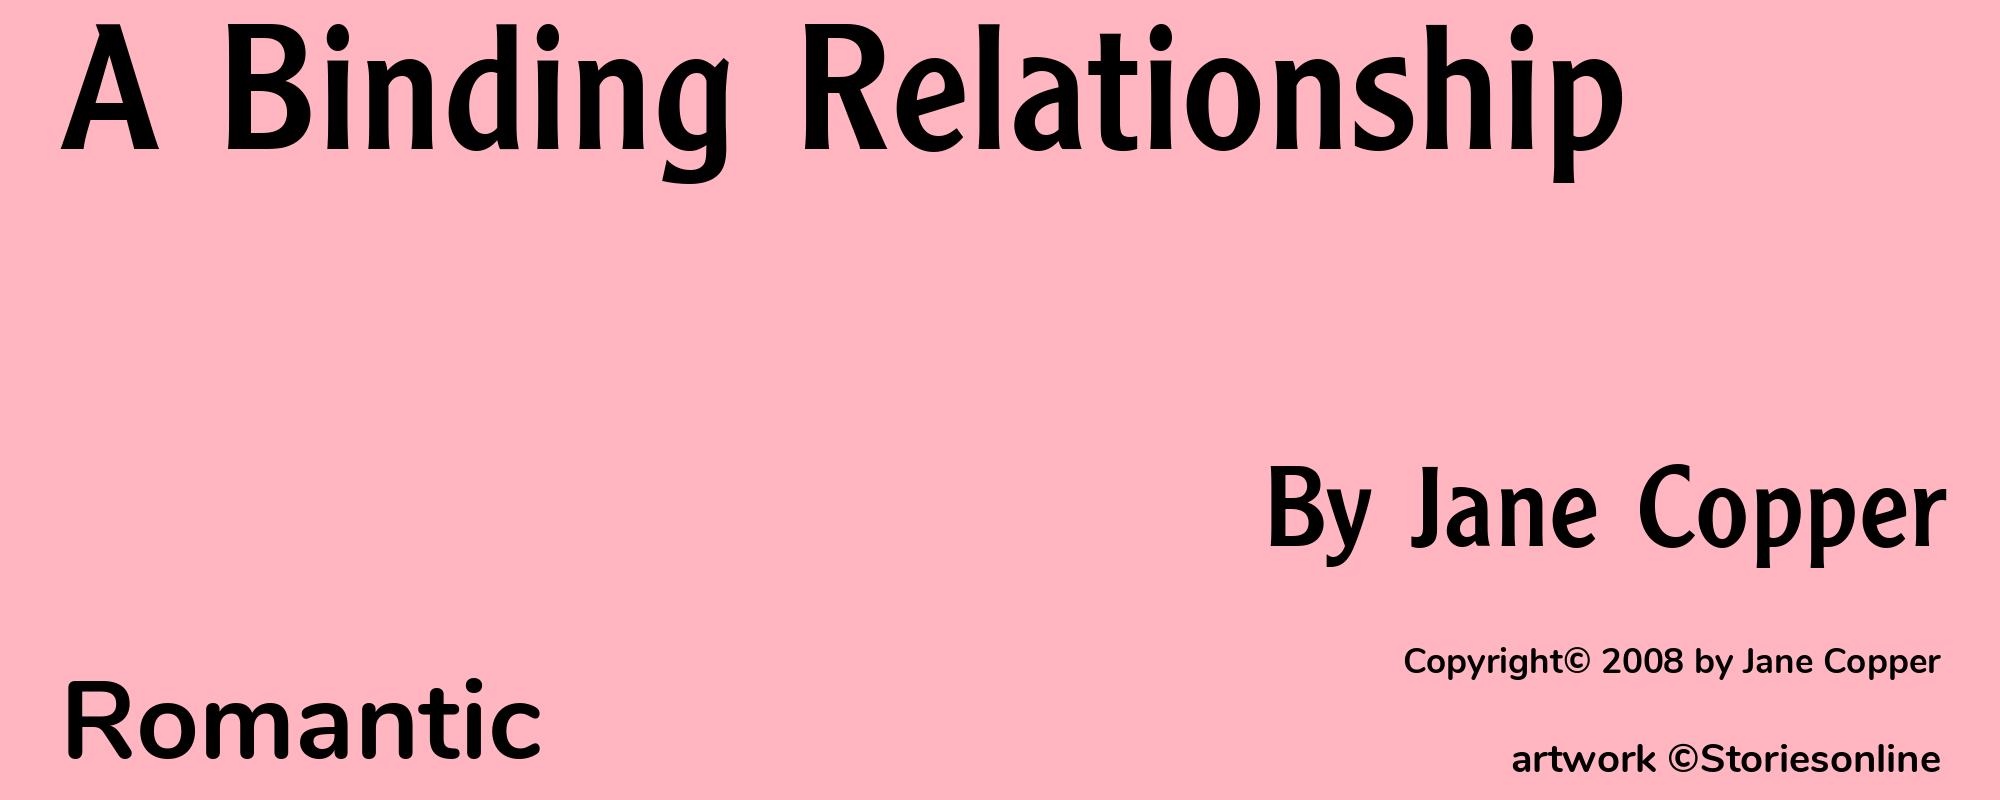 A Binding Relationship - Cover